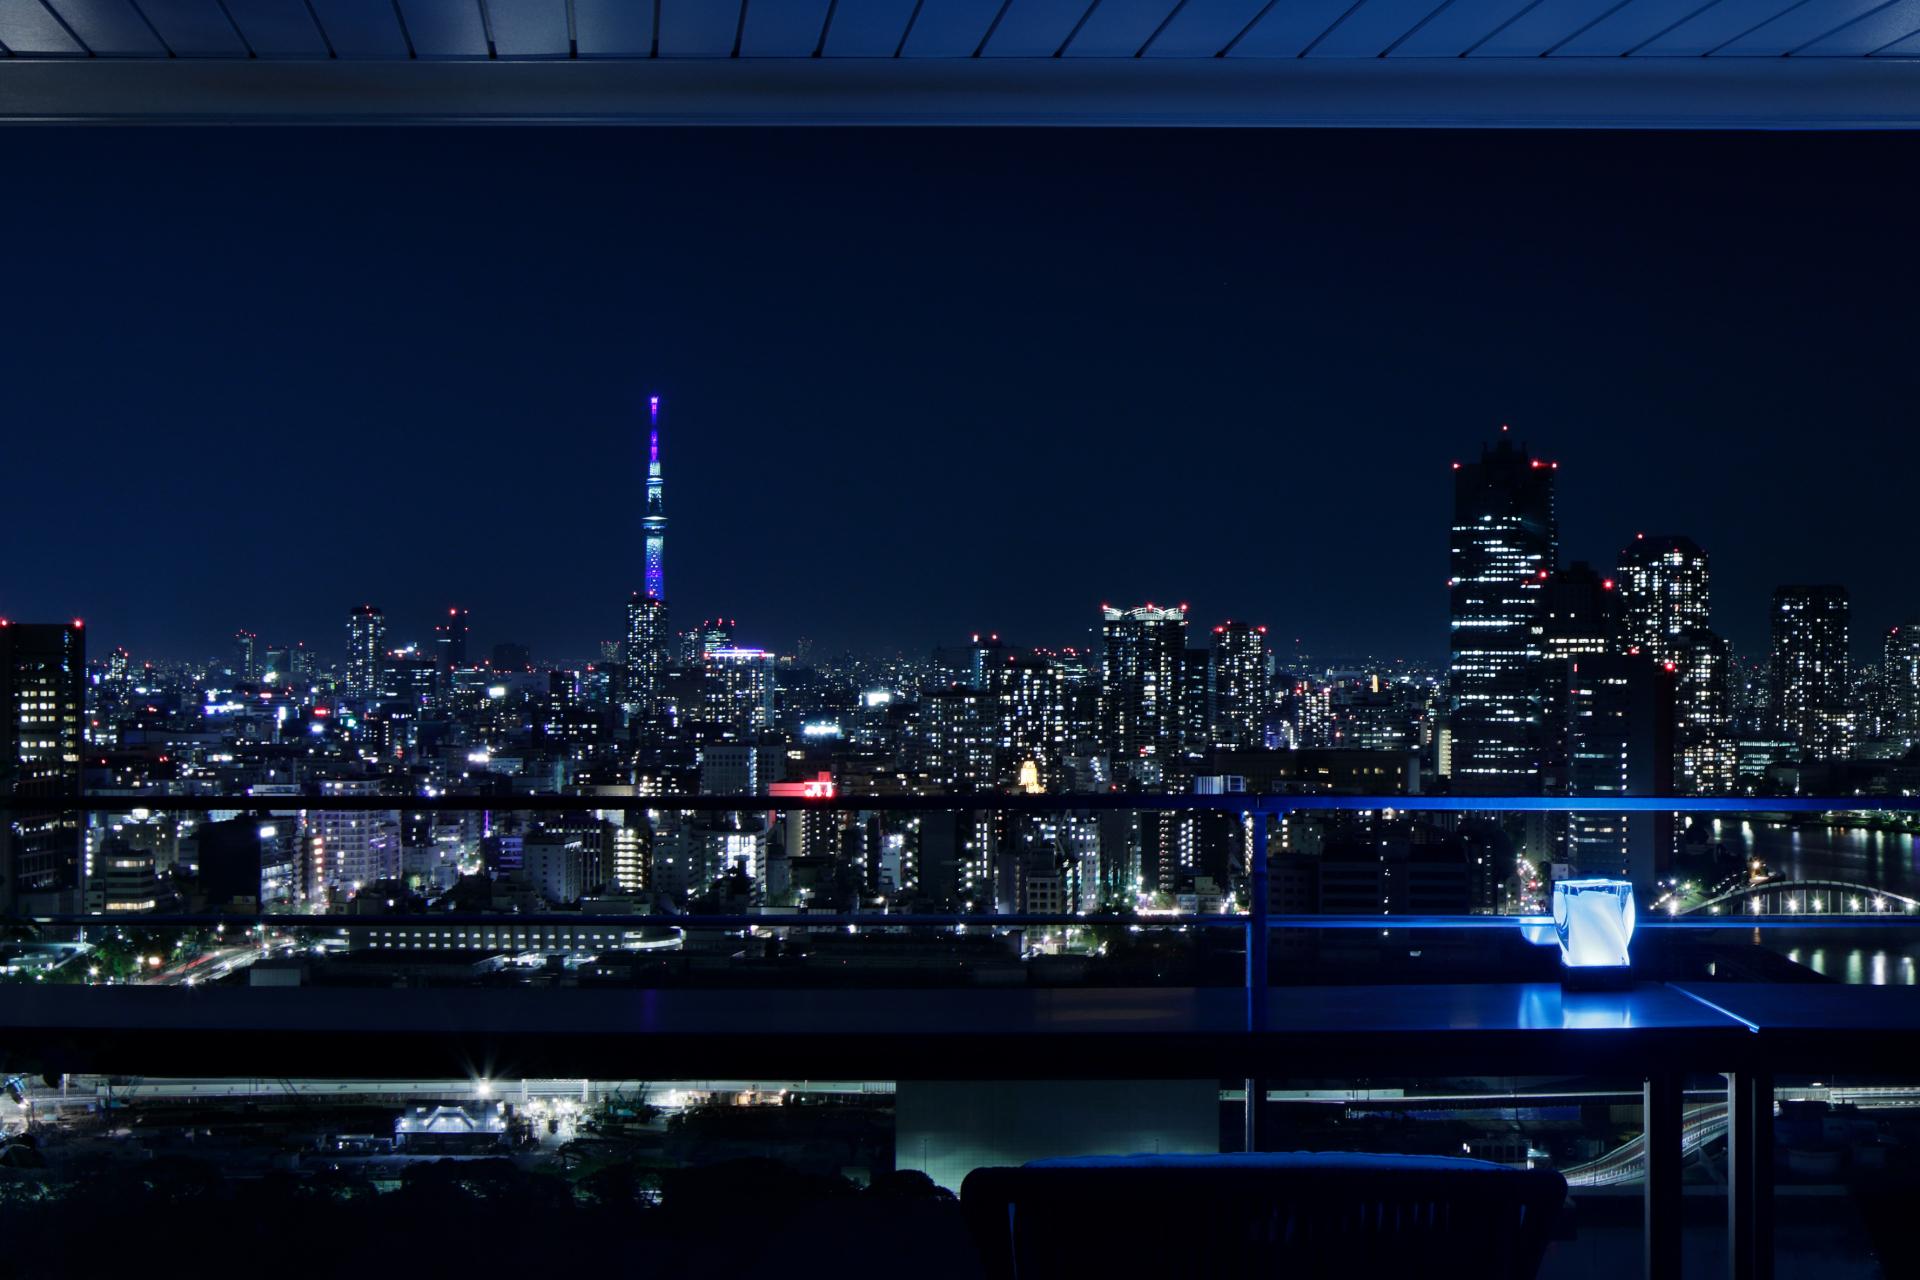 Night view from the open terrace at Club mesm